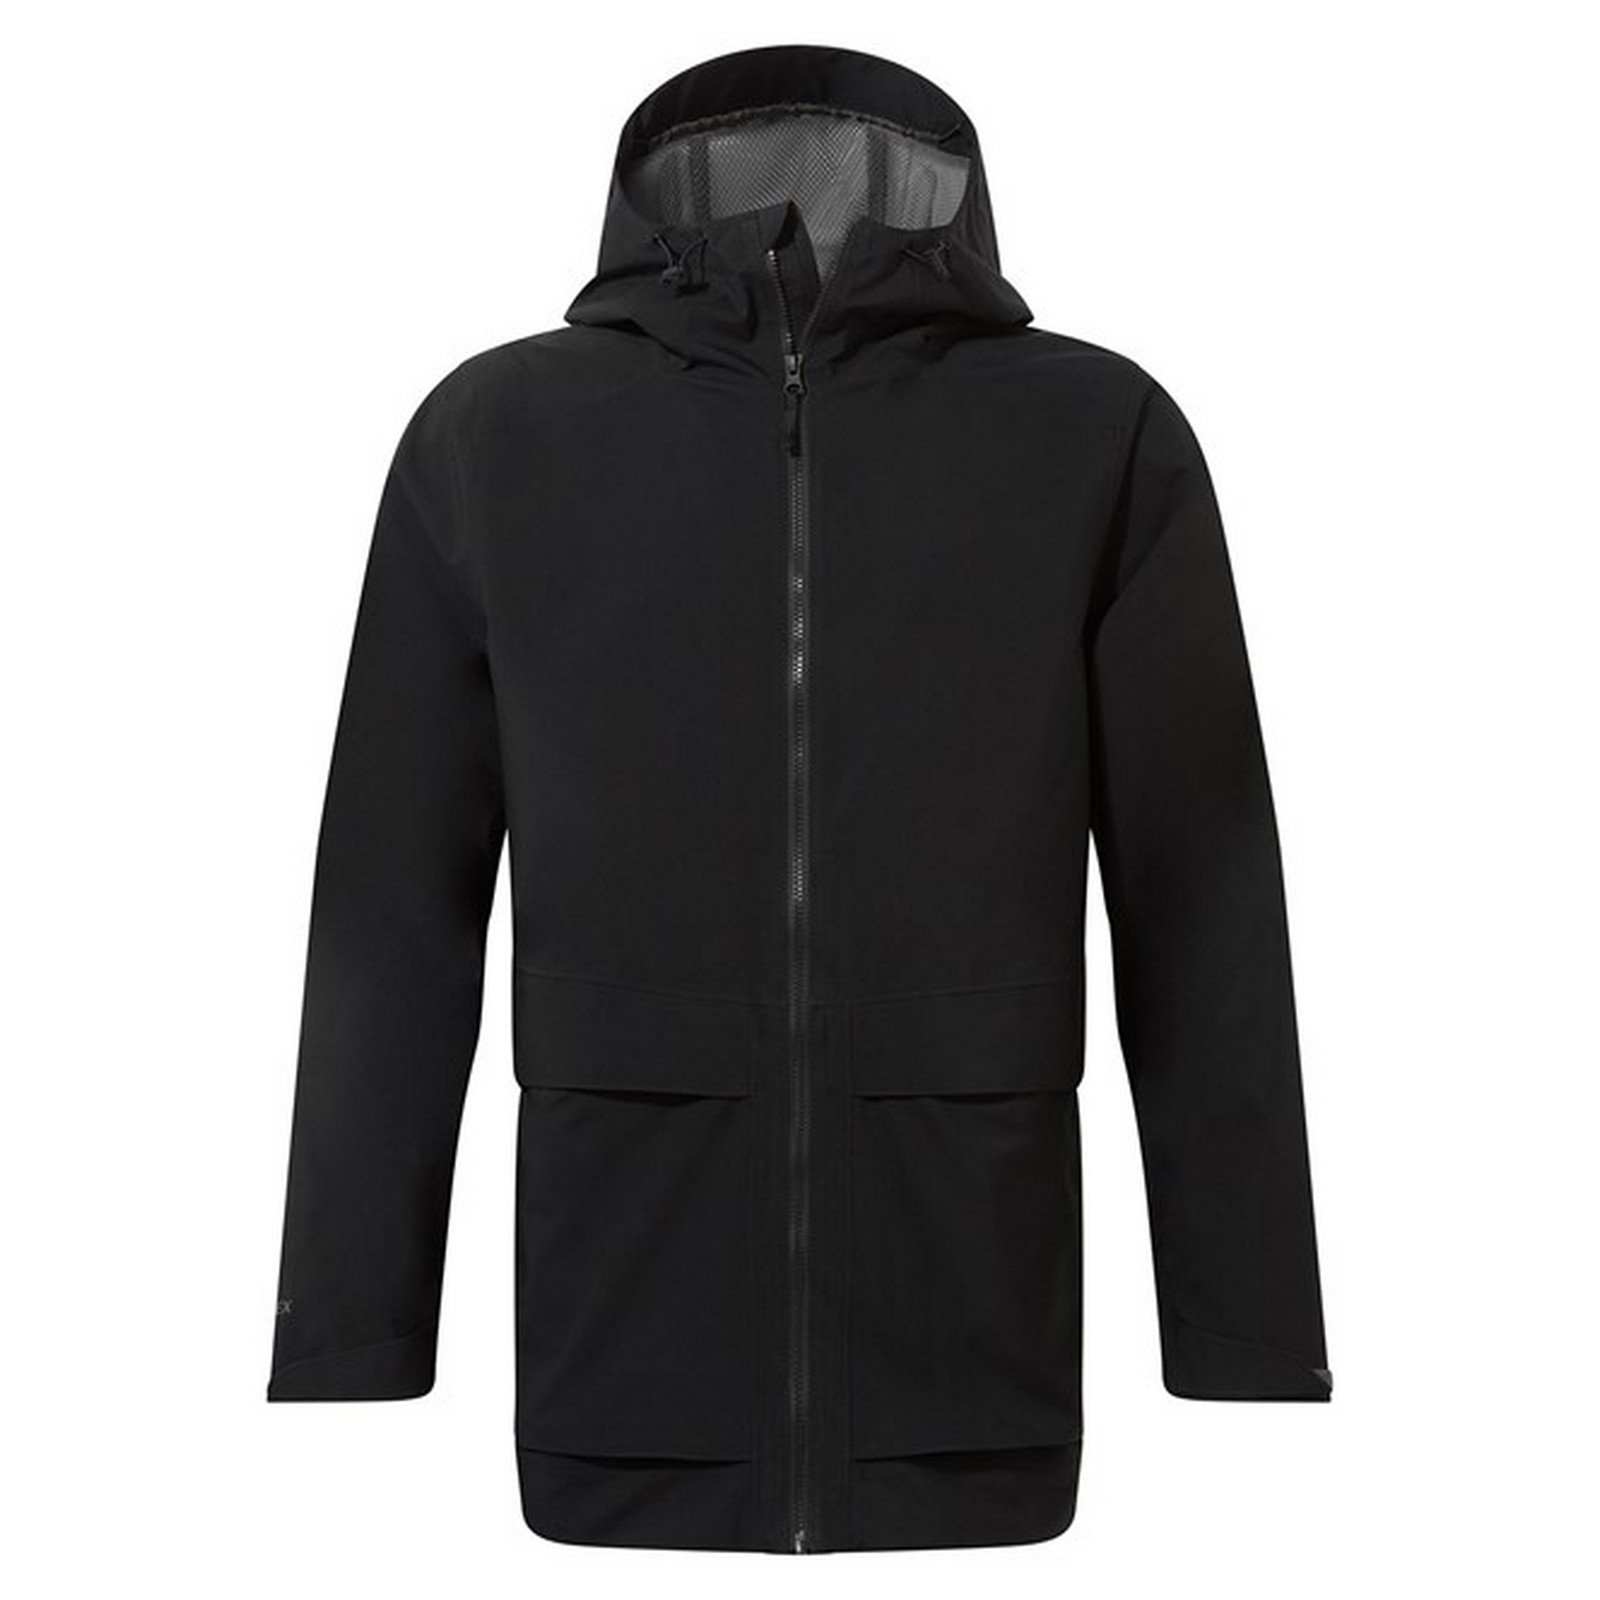 Craghoppers Expert Gore-Tex jacket | WISE Worksafe